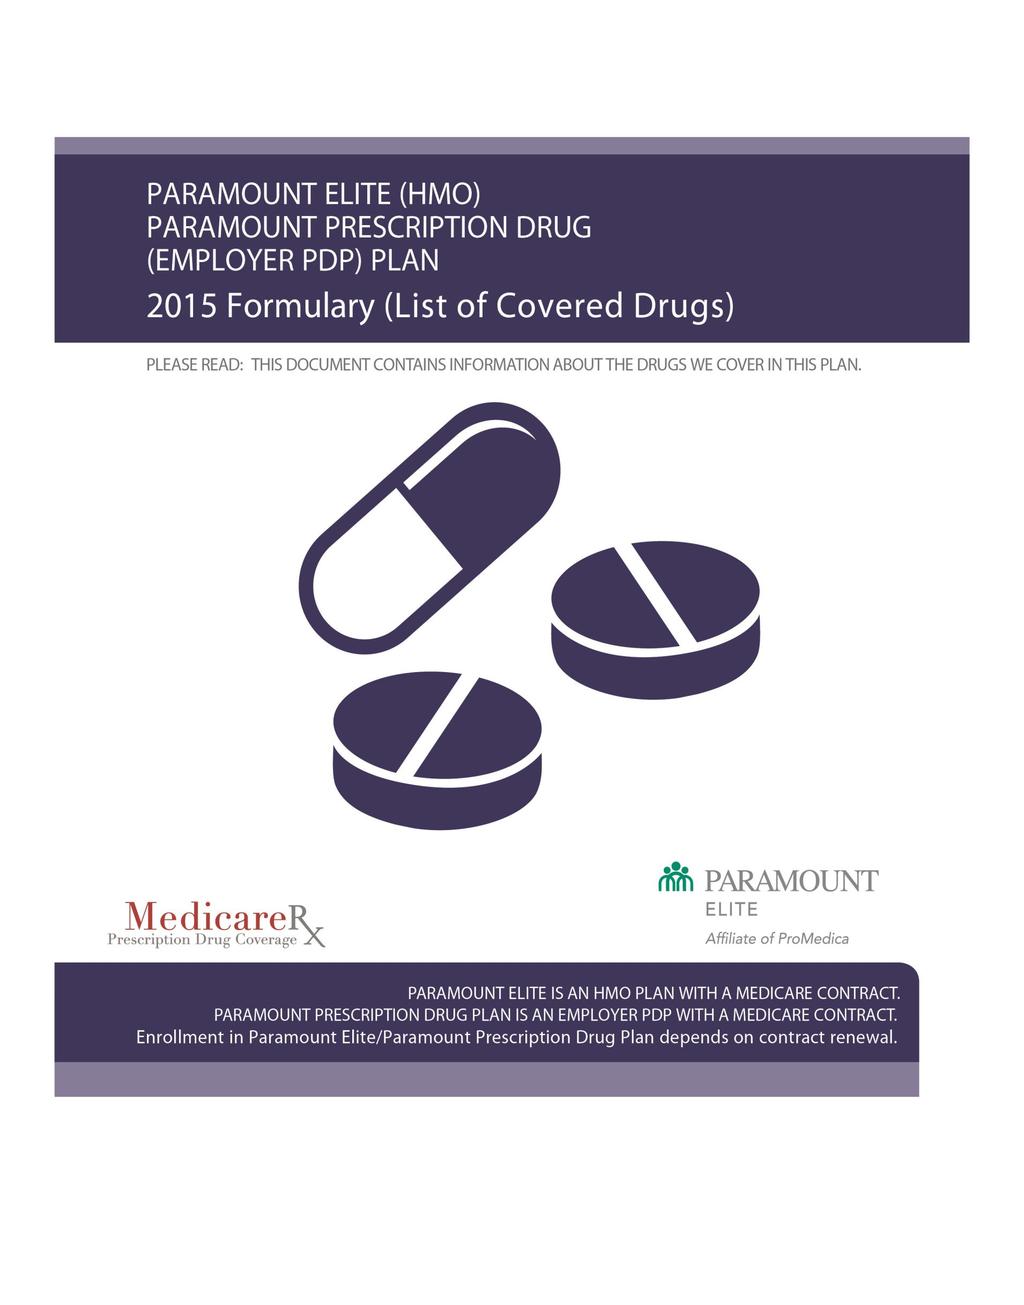 This formulary was updated on 11/01/2015.